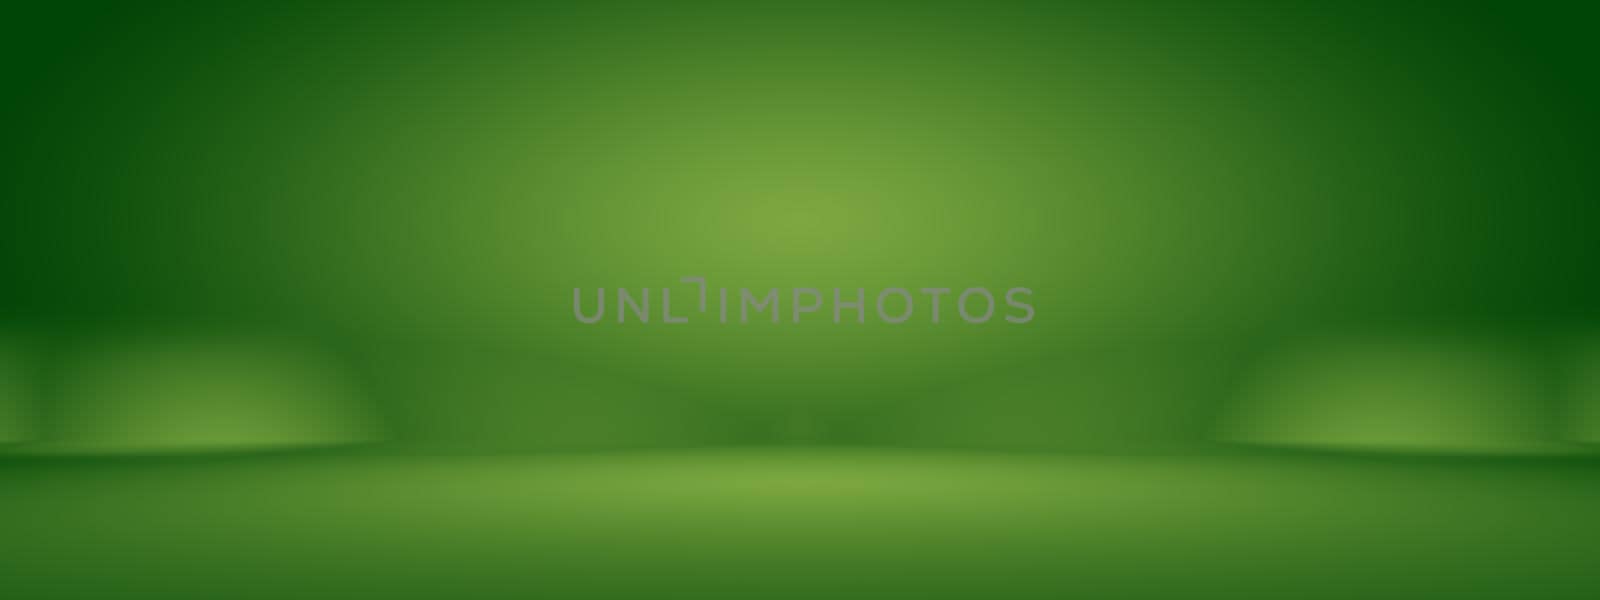 Abstract blur empty Green gradient Studio well use as background,website template,frame,business report by Benzoix